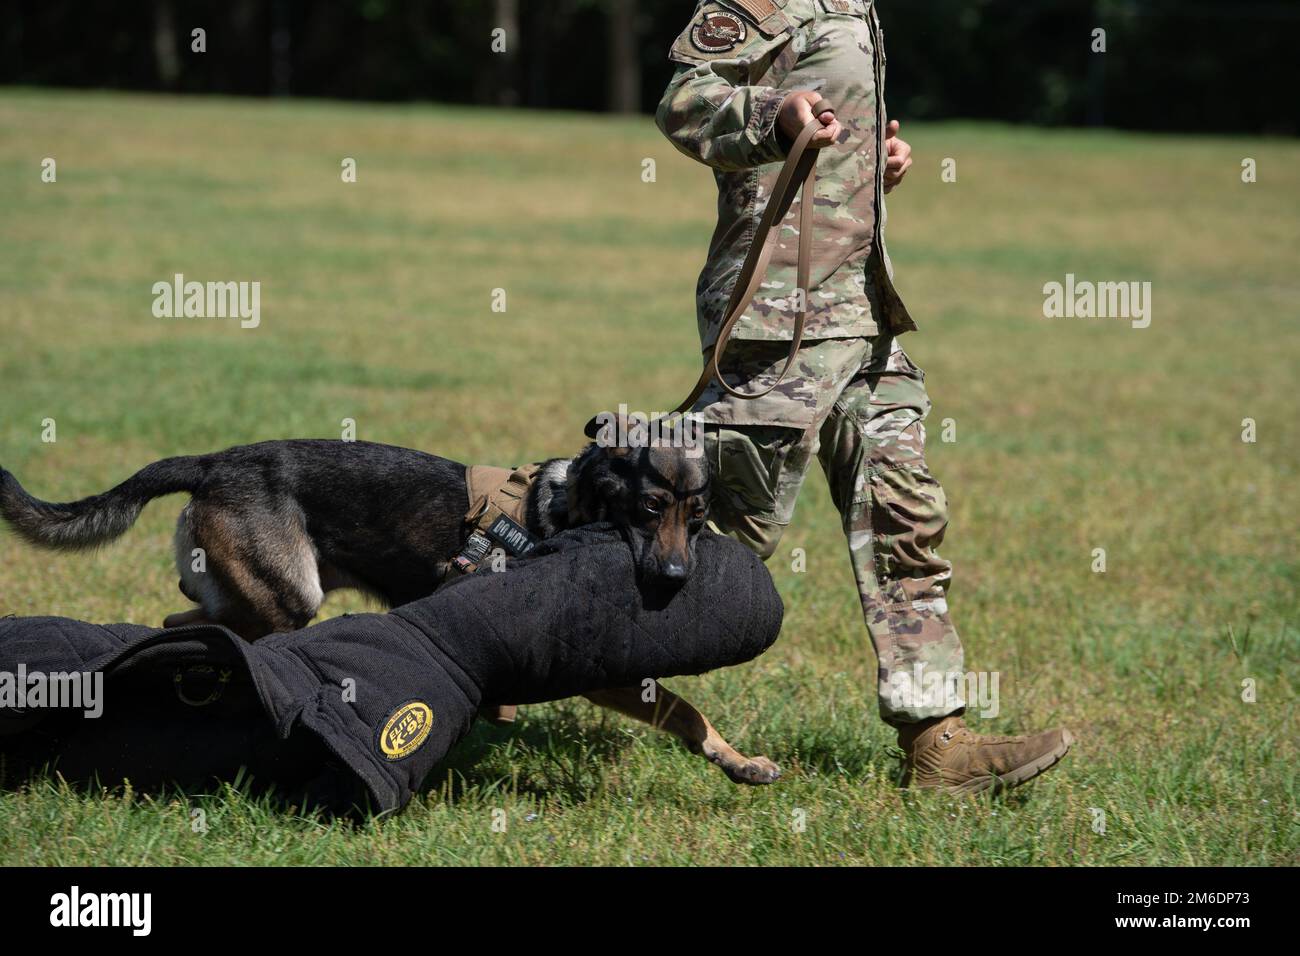 .S. Air Force Senior Airman Brady Sloup, 23rd Security Forces Squadron military working dog handler, walks MWD Oszkar around a field after a K-9 demonstration at St. John the Evangelist Catholic School, Valdosta, Georgia, April 25, 2022. To highlight Month of the Military Child, the St. John faculty hosted the K-9 demo to show appreciation for the military students and their classmates. The demo entailed bite suit training and verbal commands to highlight the dogs training. Stock Photo